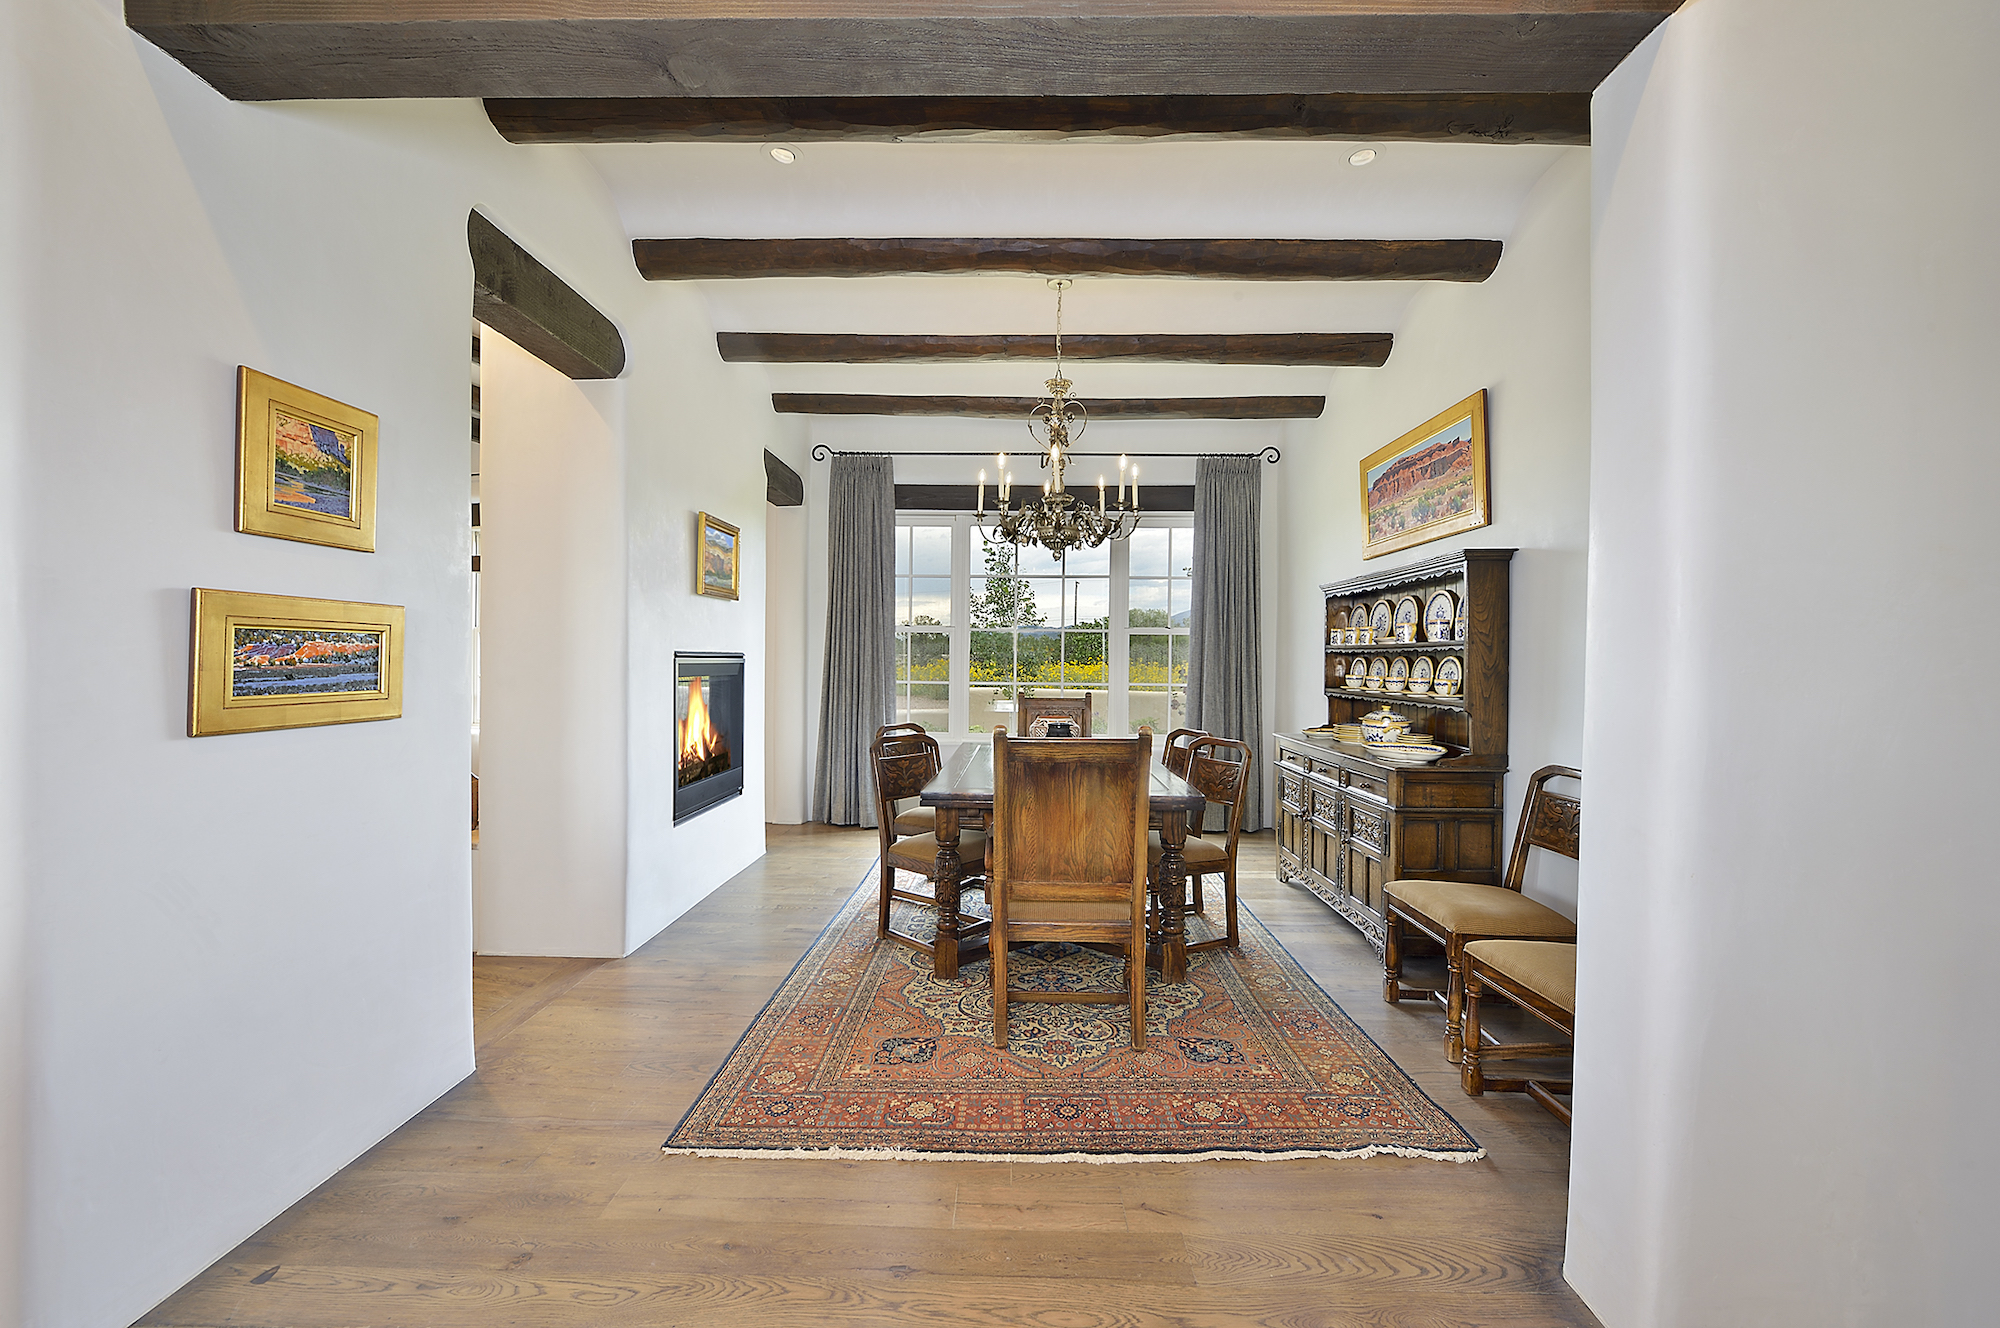 Project OLD SANTA FE TRAIL RESIDENCE